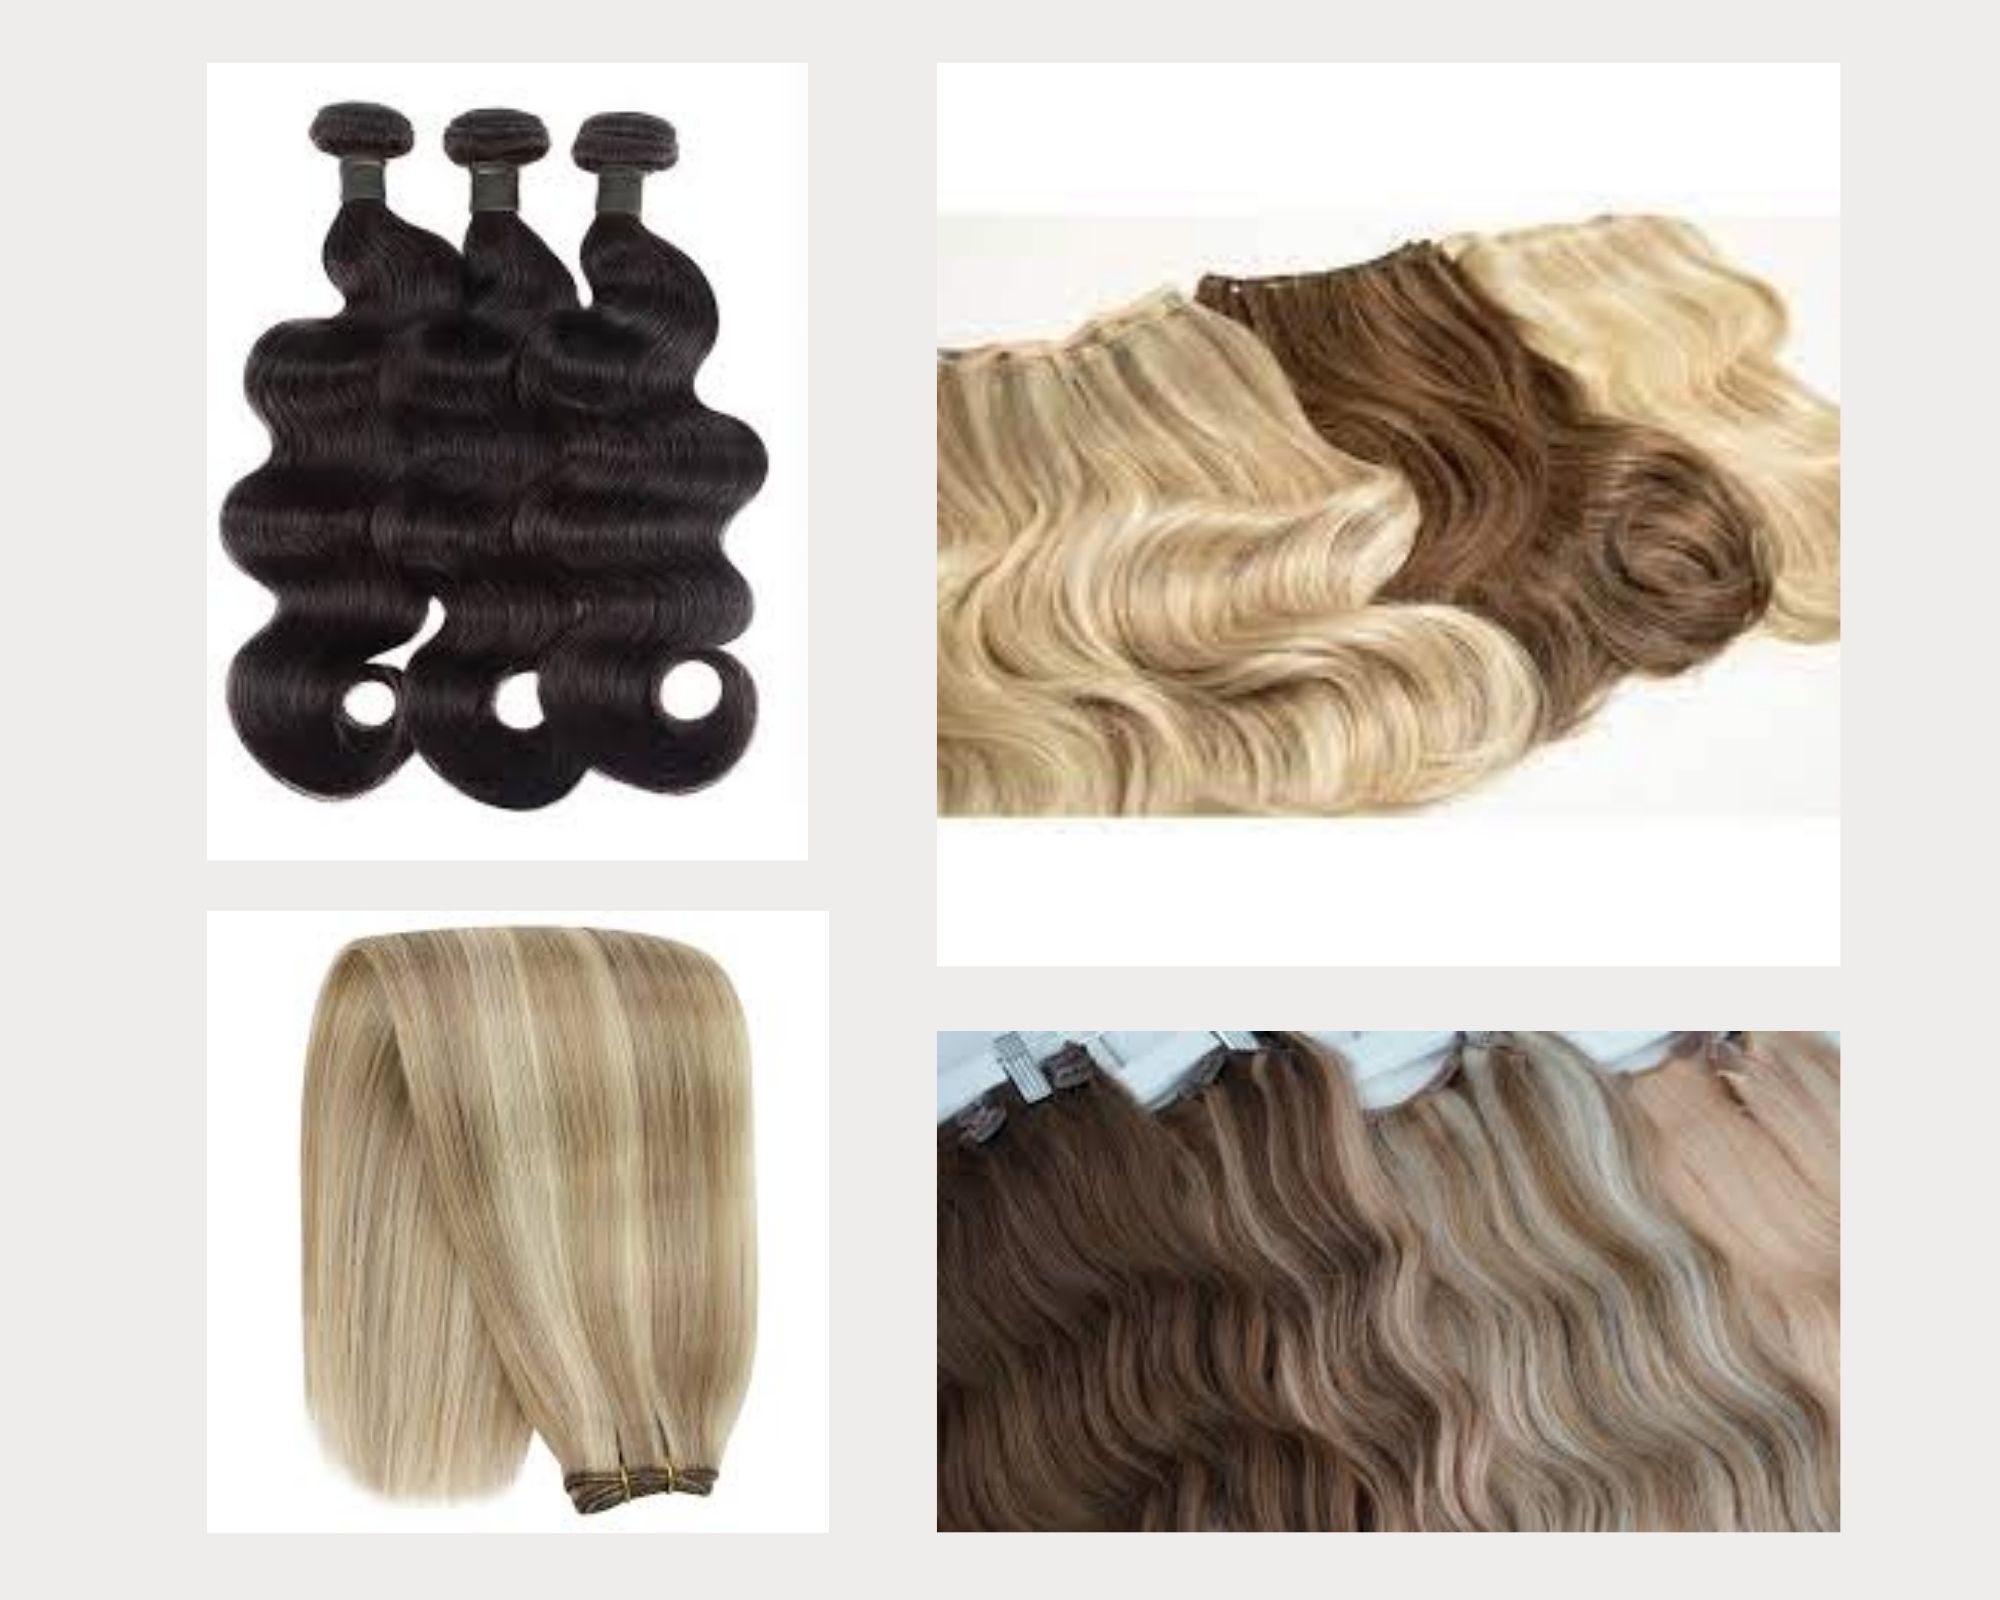 weft-hair-extensions-the-new-trend-of-the-hair-industry7